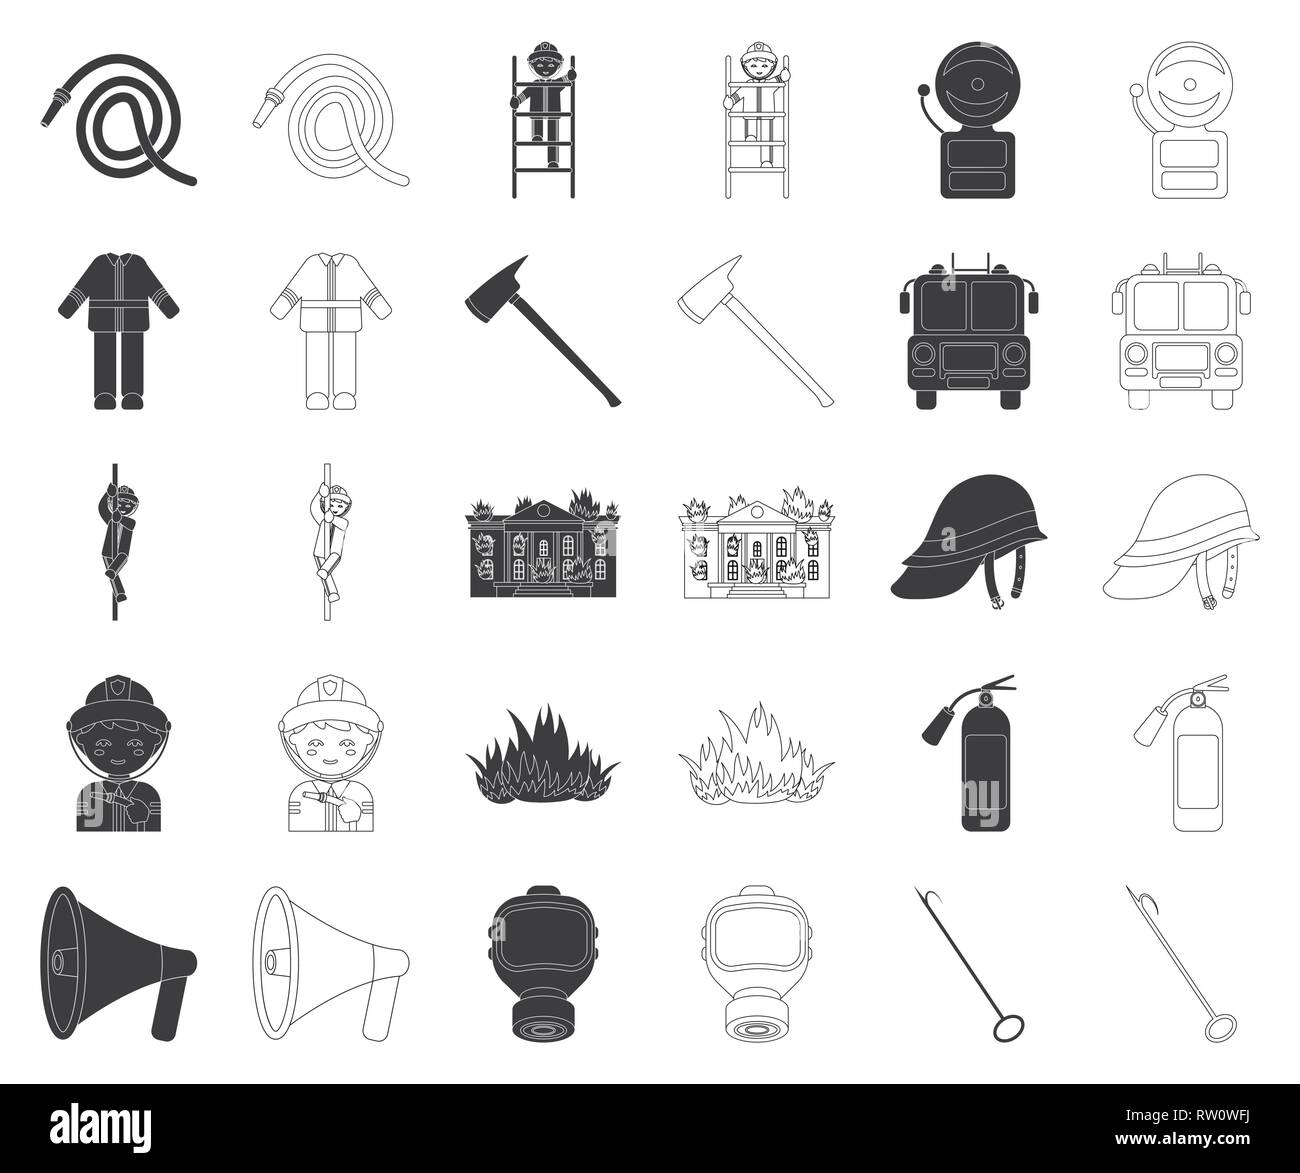 accessories,apparatus,art,attribute,axe,black,outline,bucket,building,bunker,collection,conical,department,design,equipment,extinguishing,extingushier,fire,firefighter,firefighting,flame,gas,gear,helmet,icon,illustration,isolated,logo,mask,organization,pike,pole,pump,ring,separation,service,set,sign,slide,symbol,tools,vector,web Vector Vectors , Stock Vector